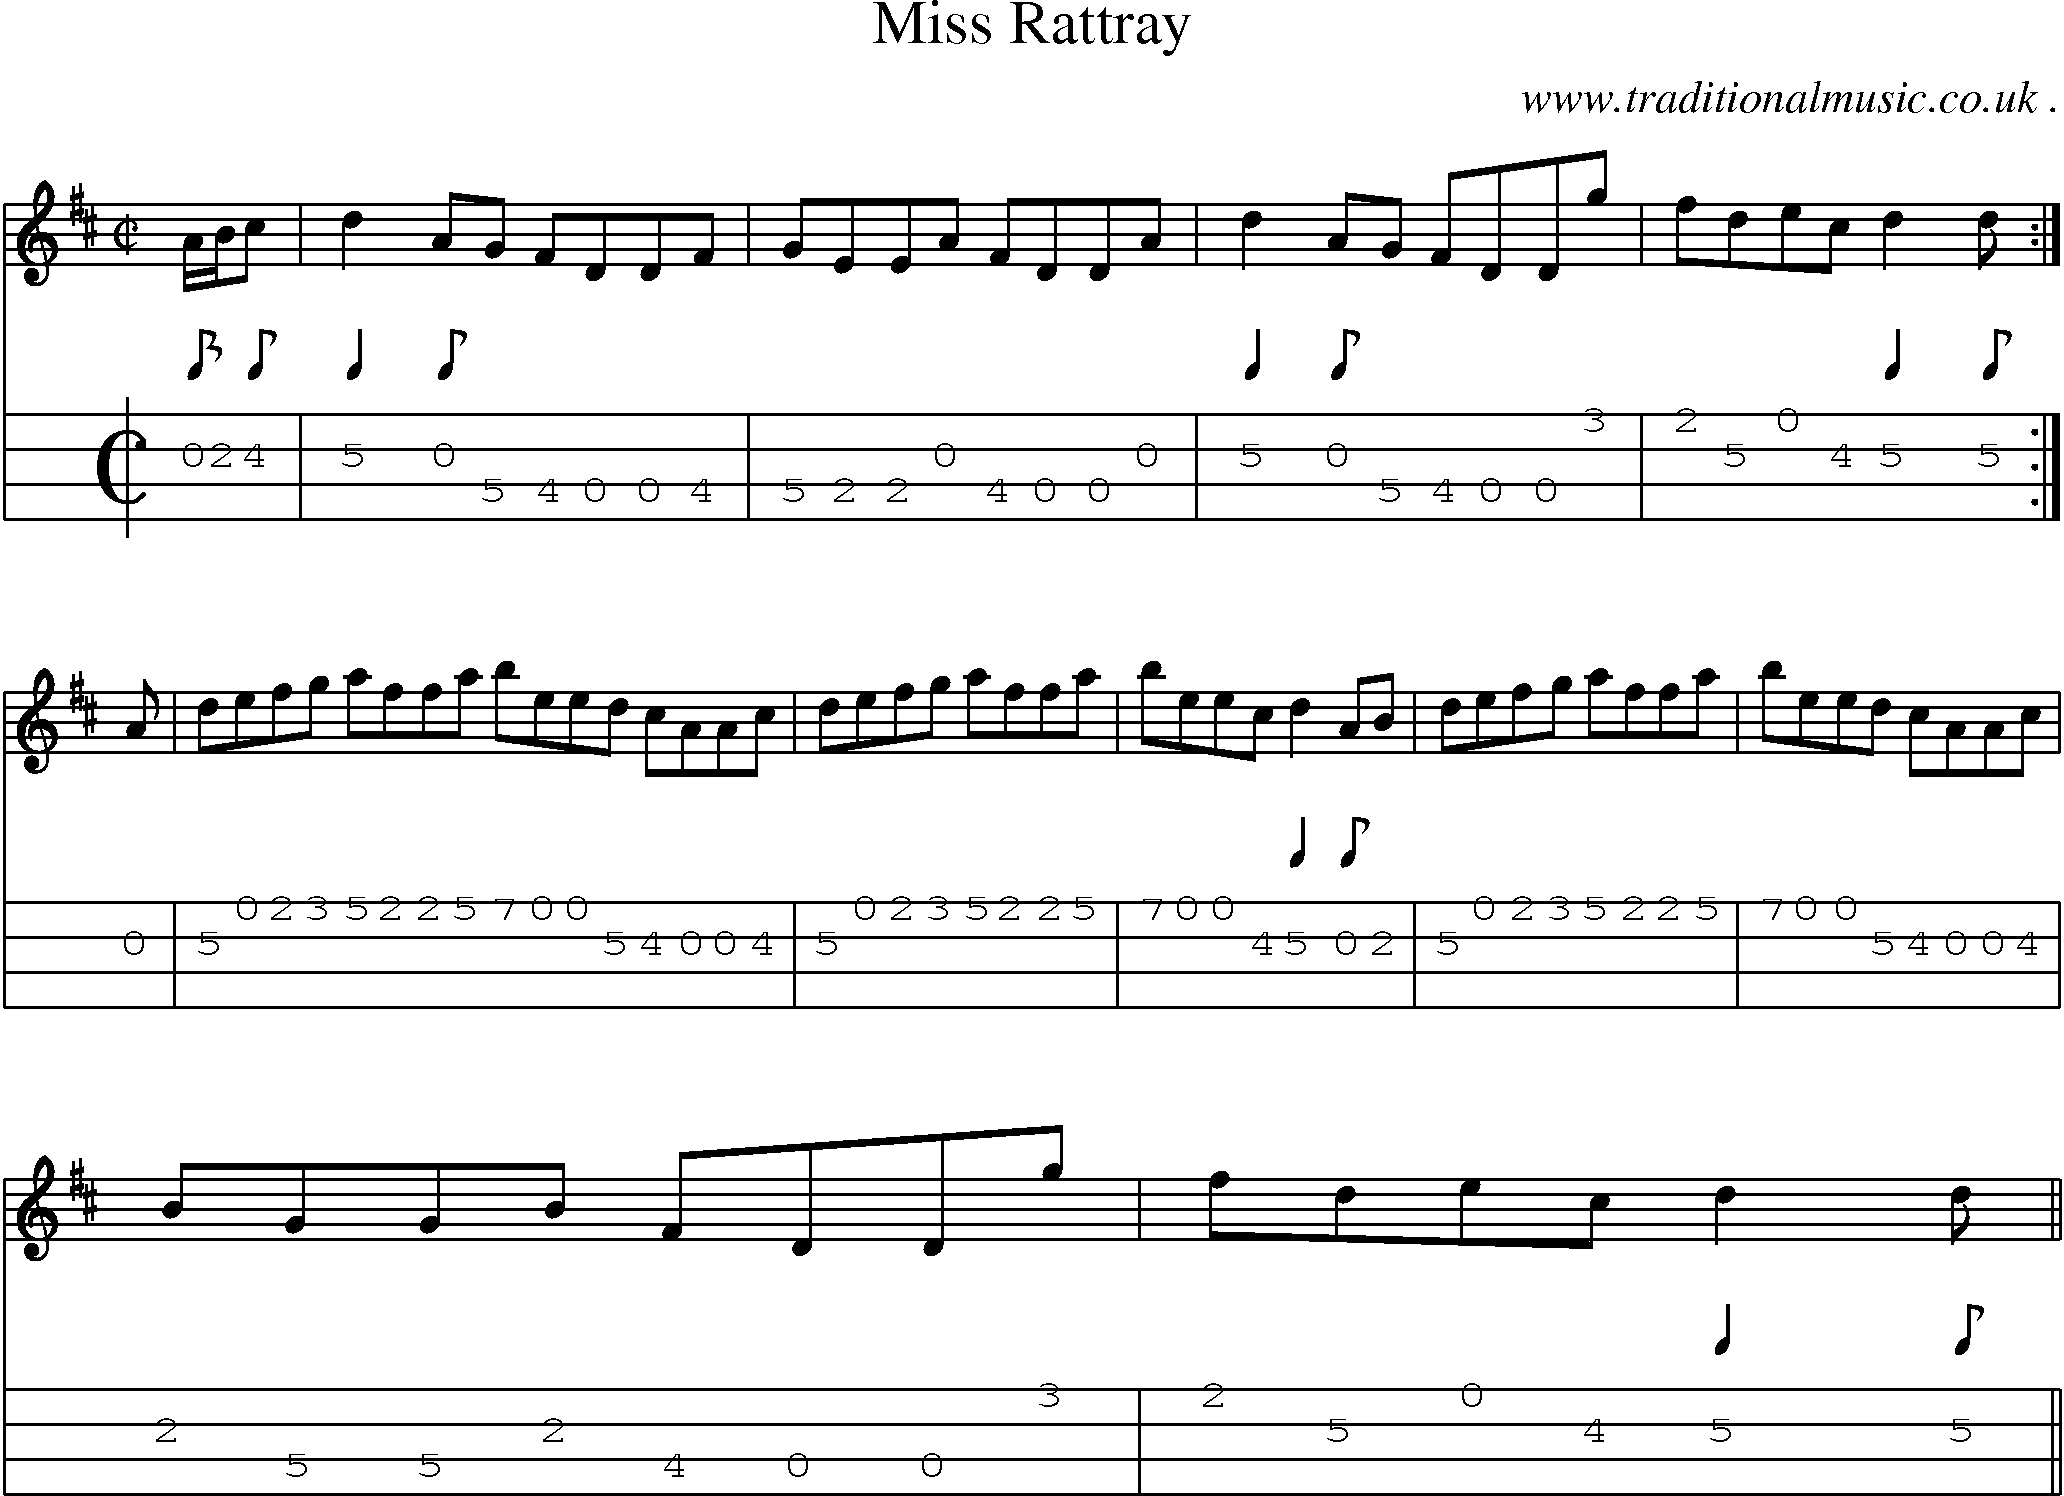 Sheet-music  score, Chords and Mandolin Tabs for Miss Rattray